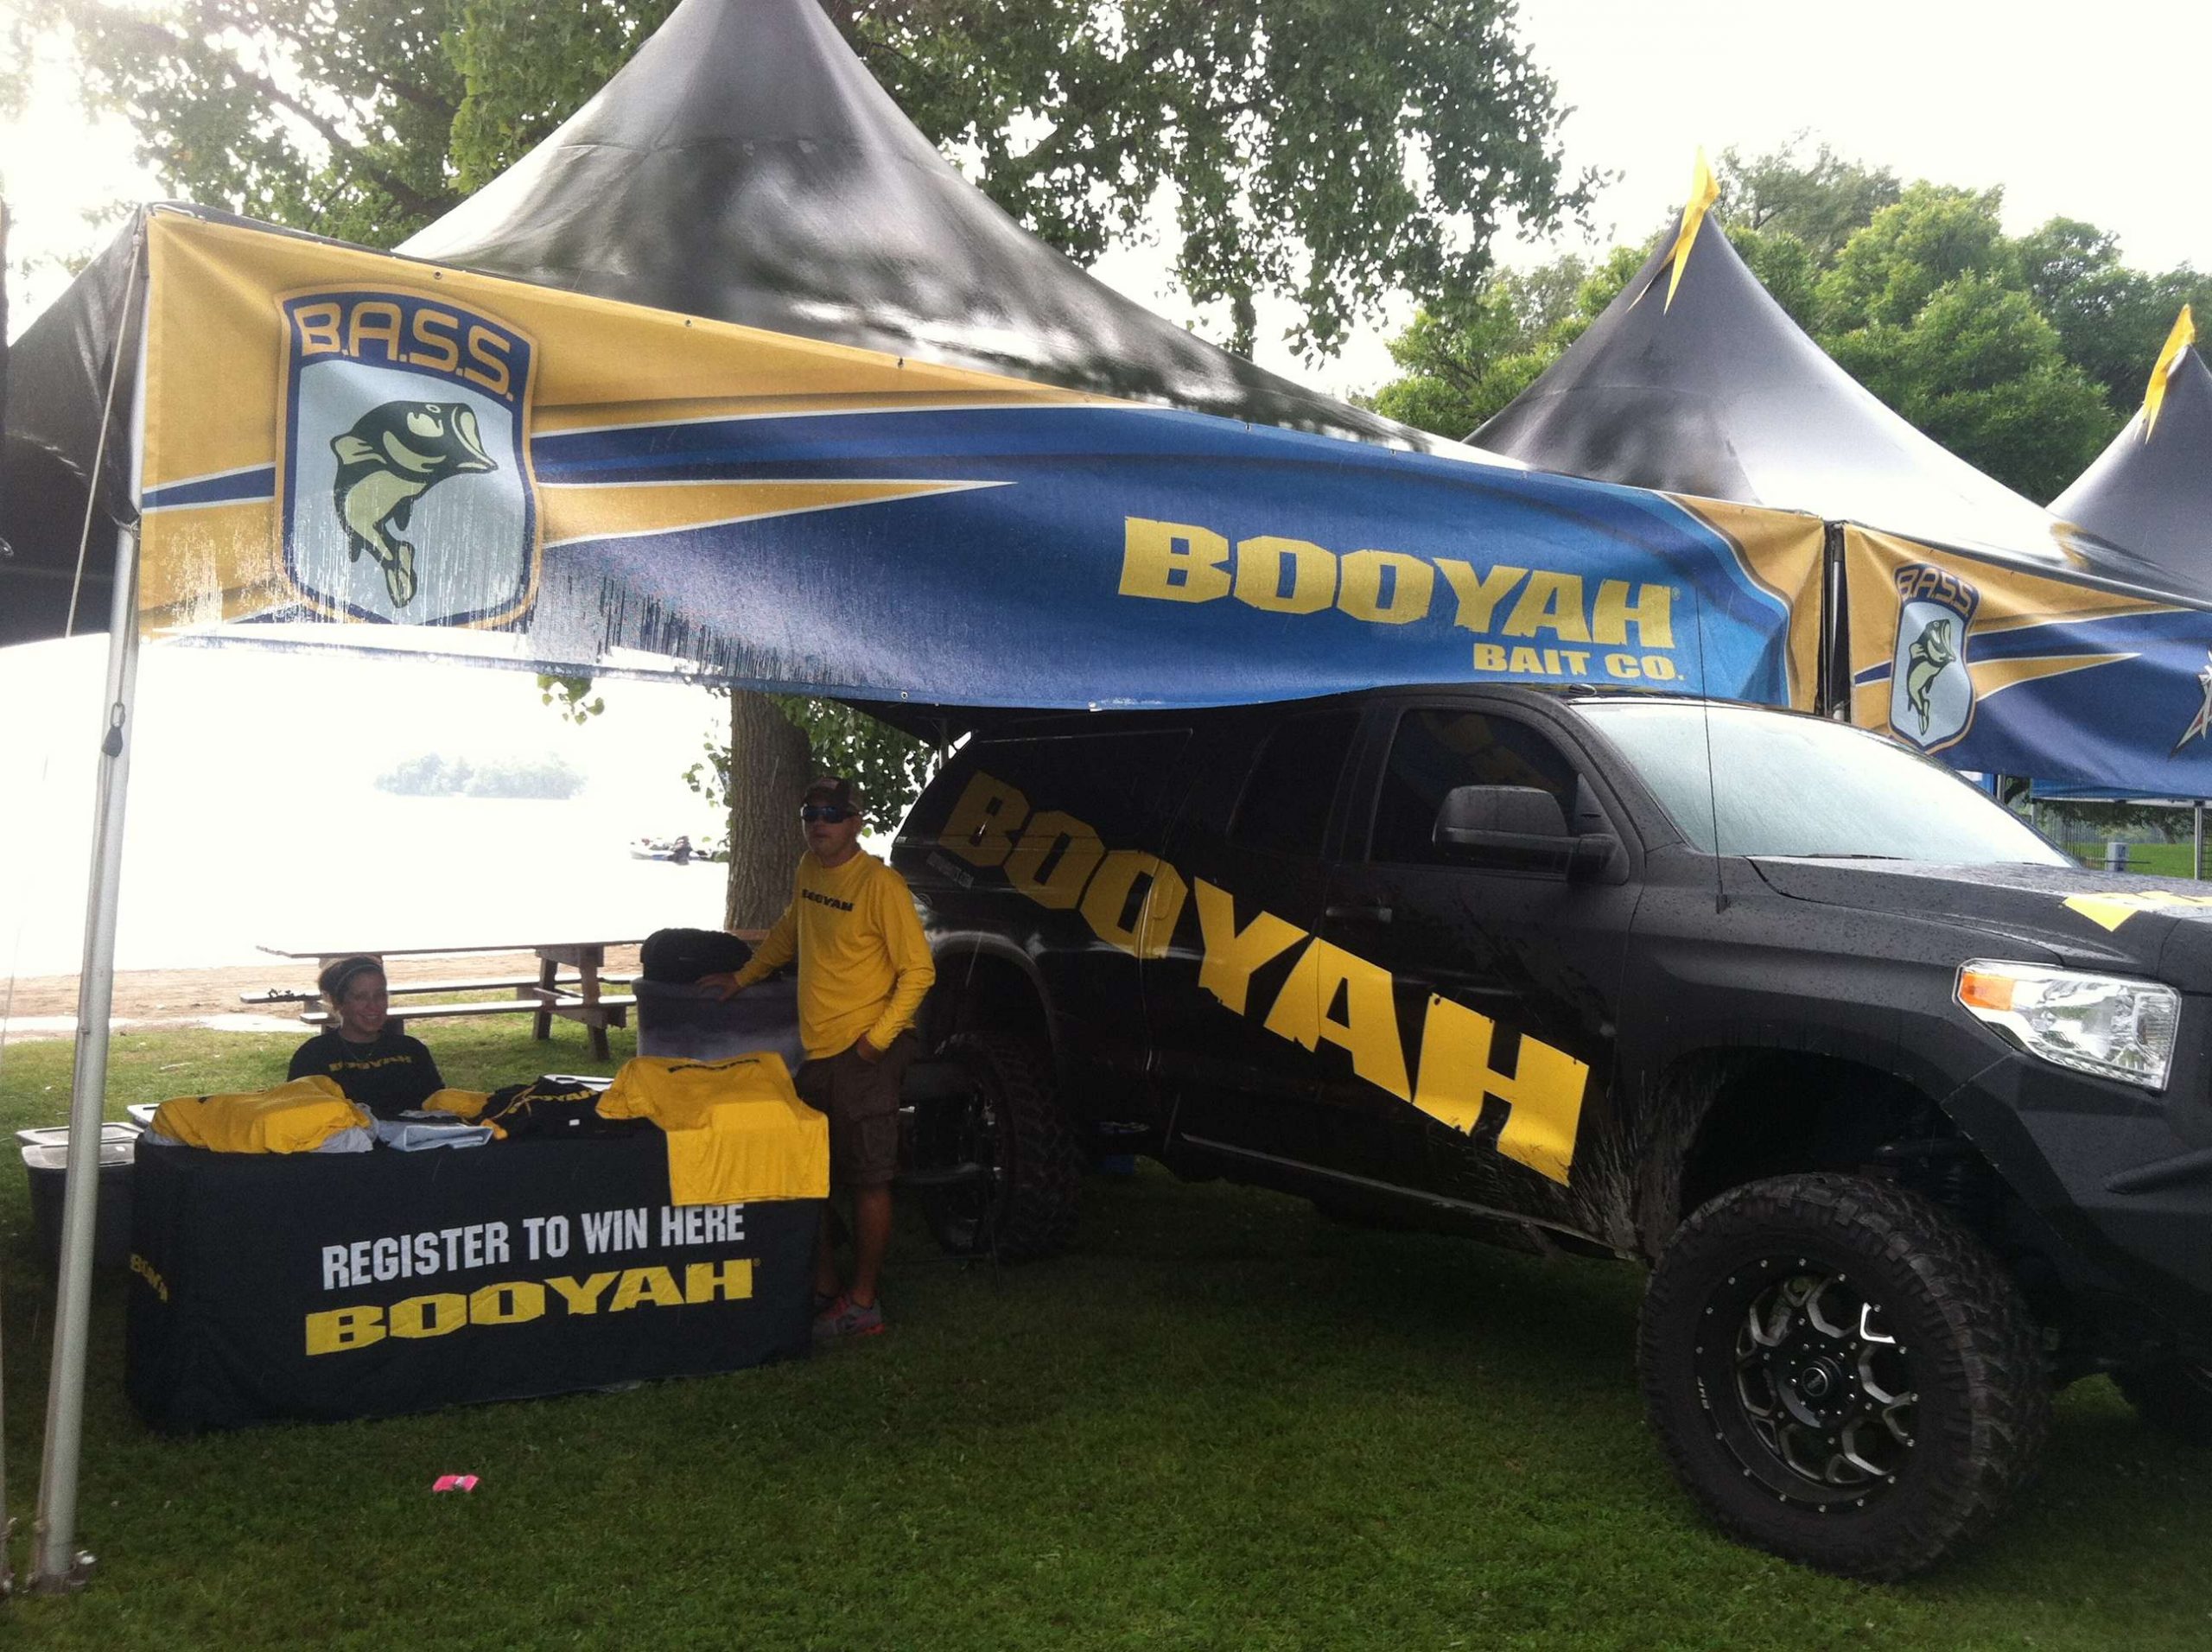 The folks at the Booyah booth were trying to stay dry. 